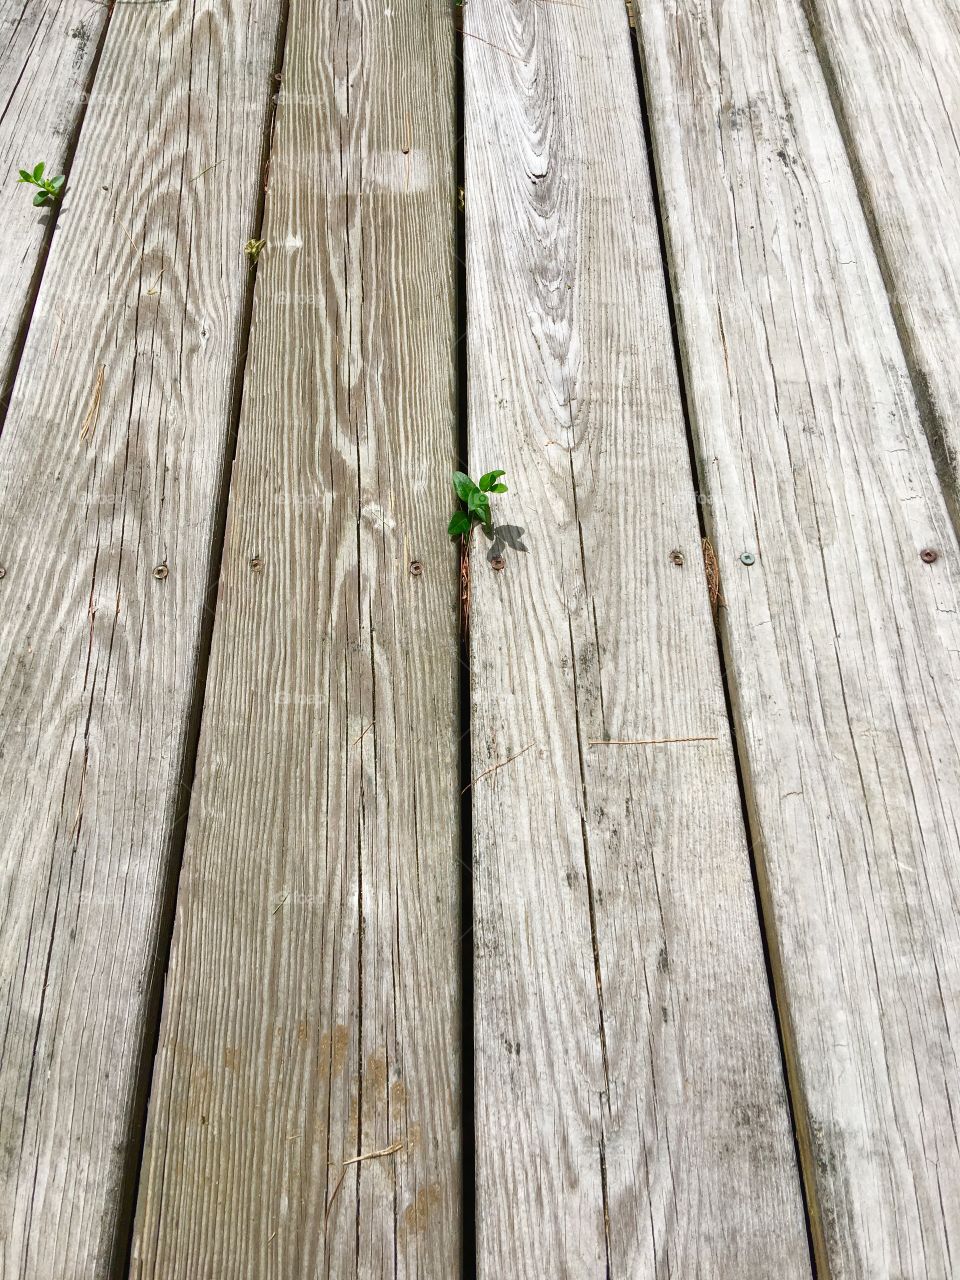 One day I saw these little leaves peaking through the grey slats of wood on our ramp.